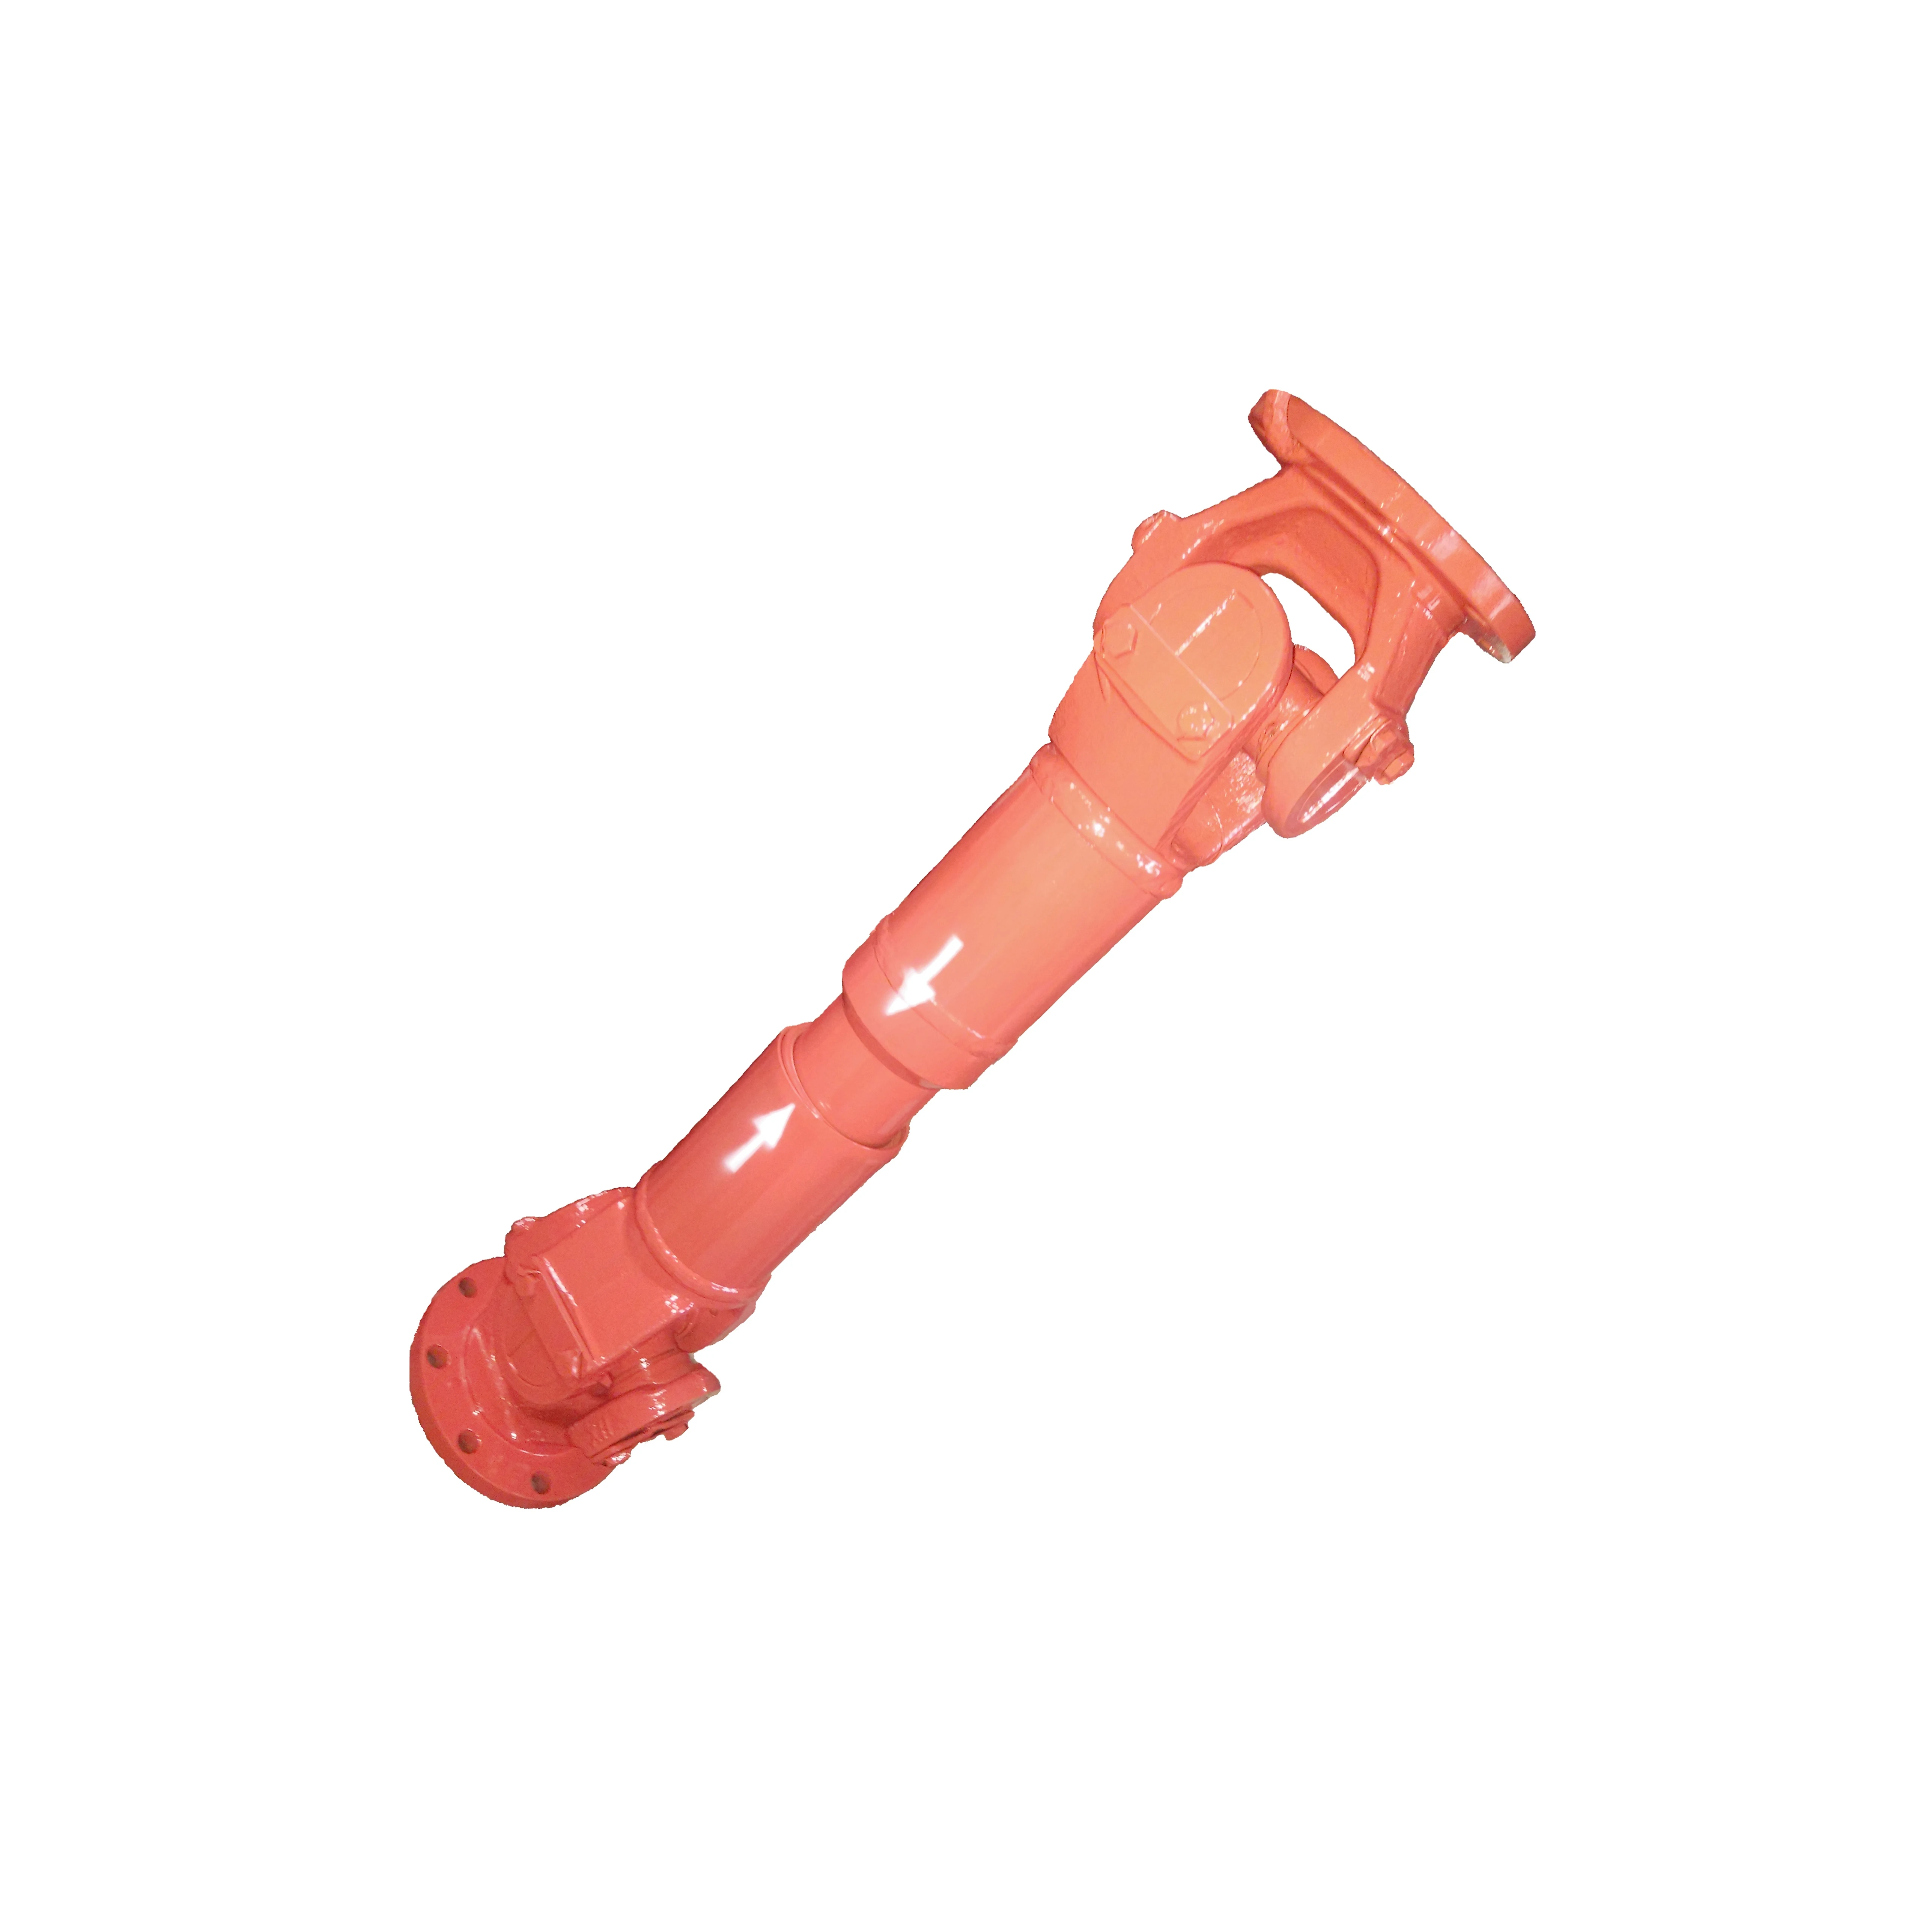 Cardan shaft for tractors